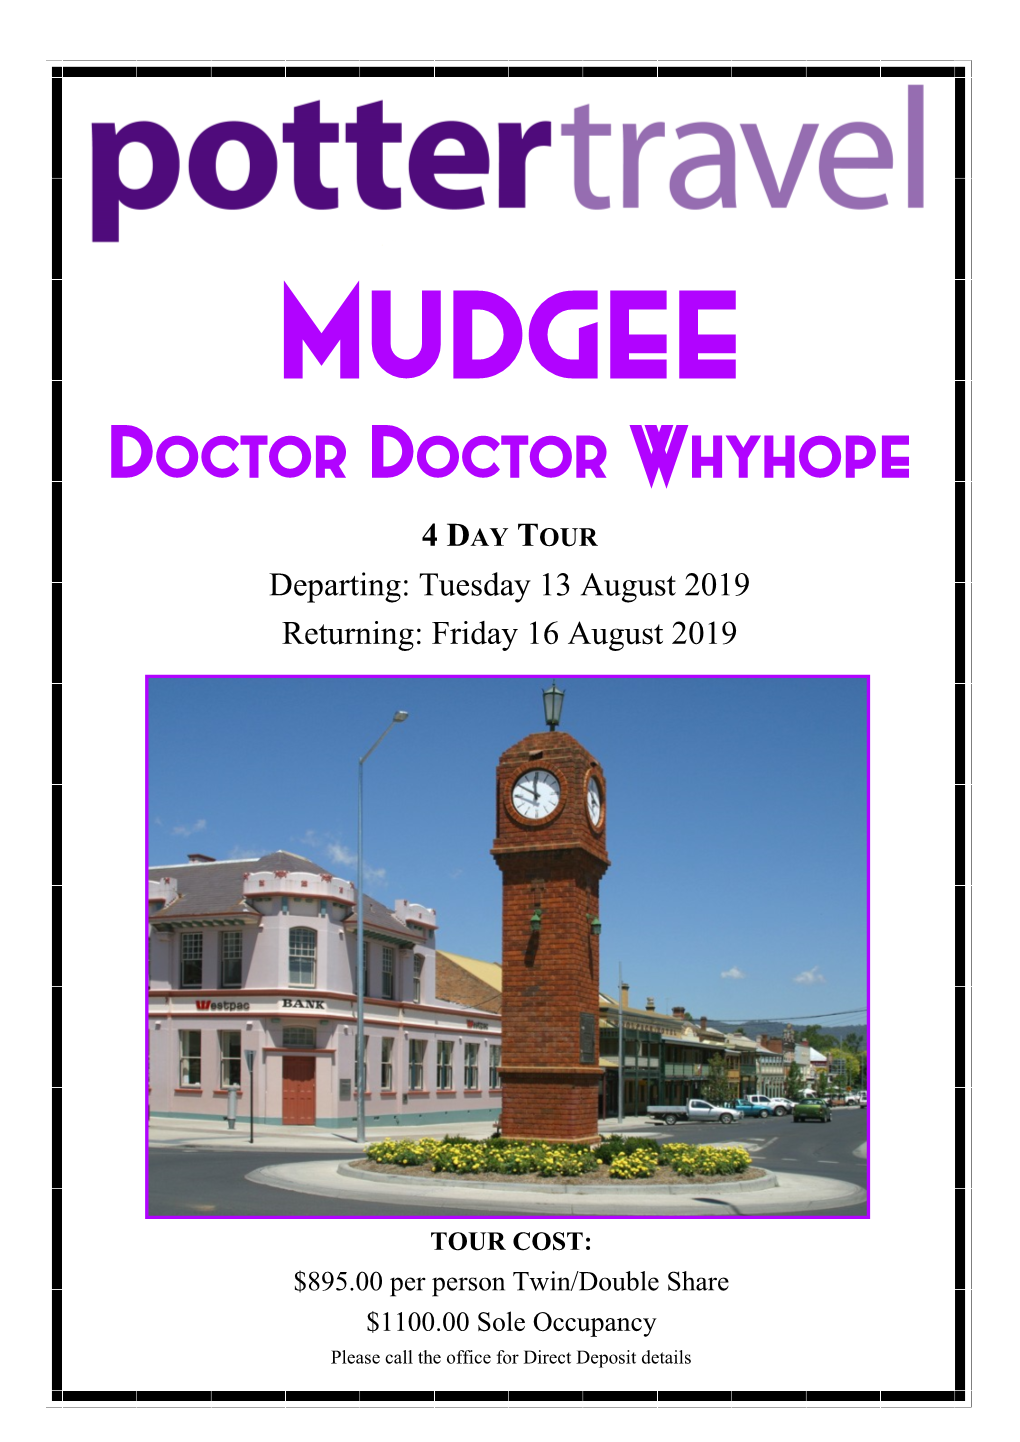 Doctor Doctor Whyhope